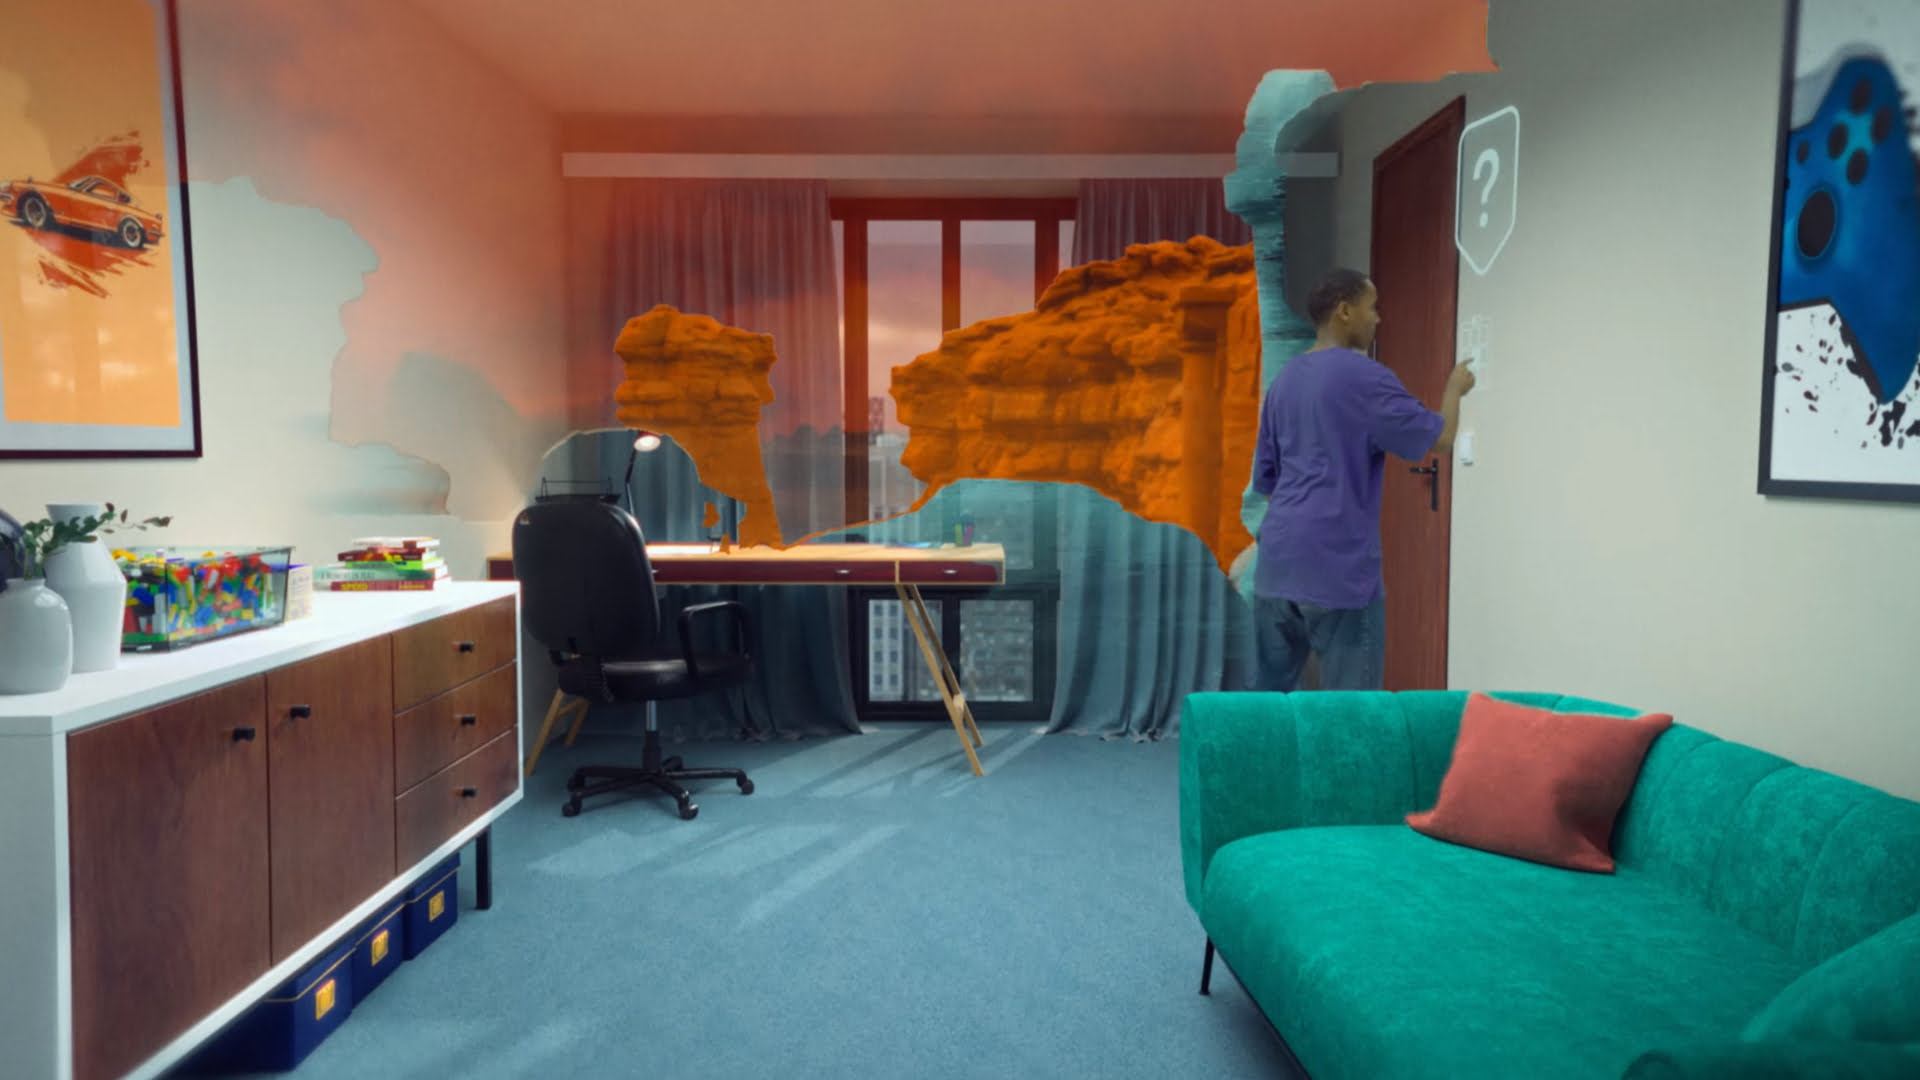 SyncReality wants to create “house-sized” VR gaming spaces for Quest 2